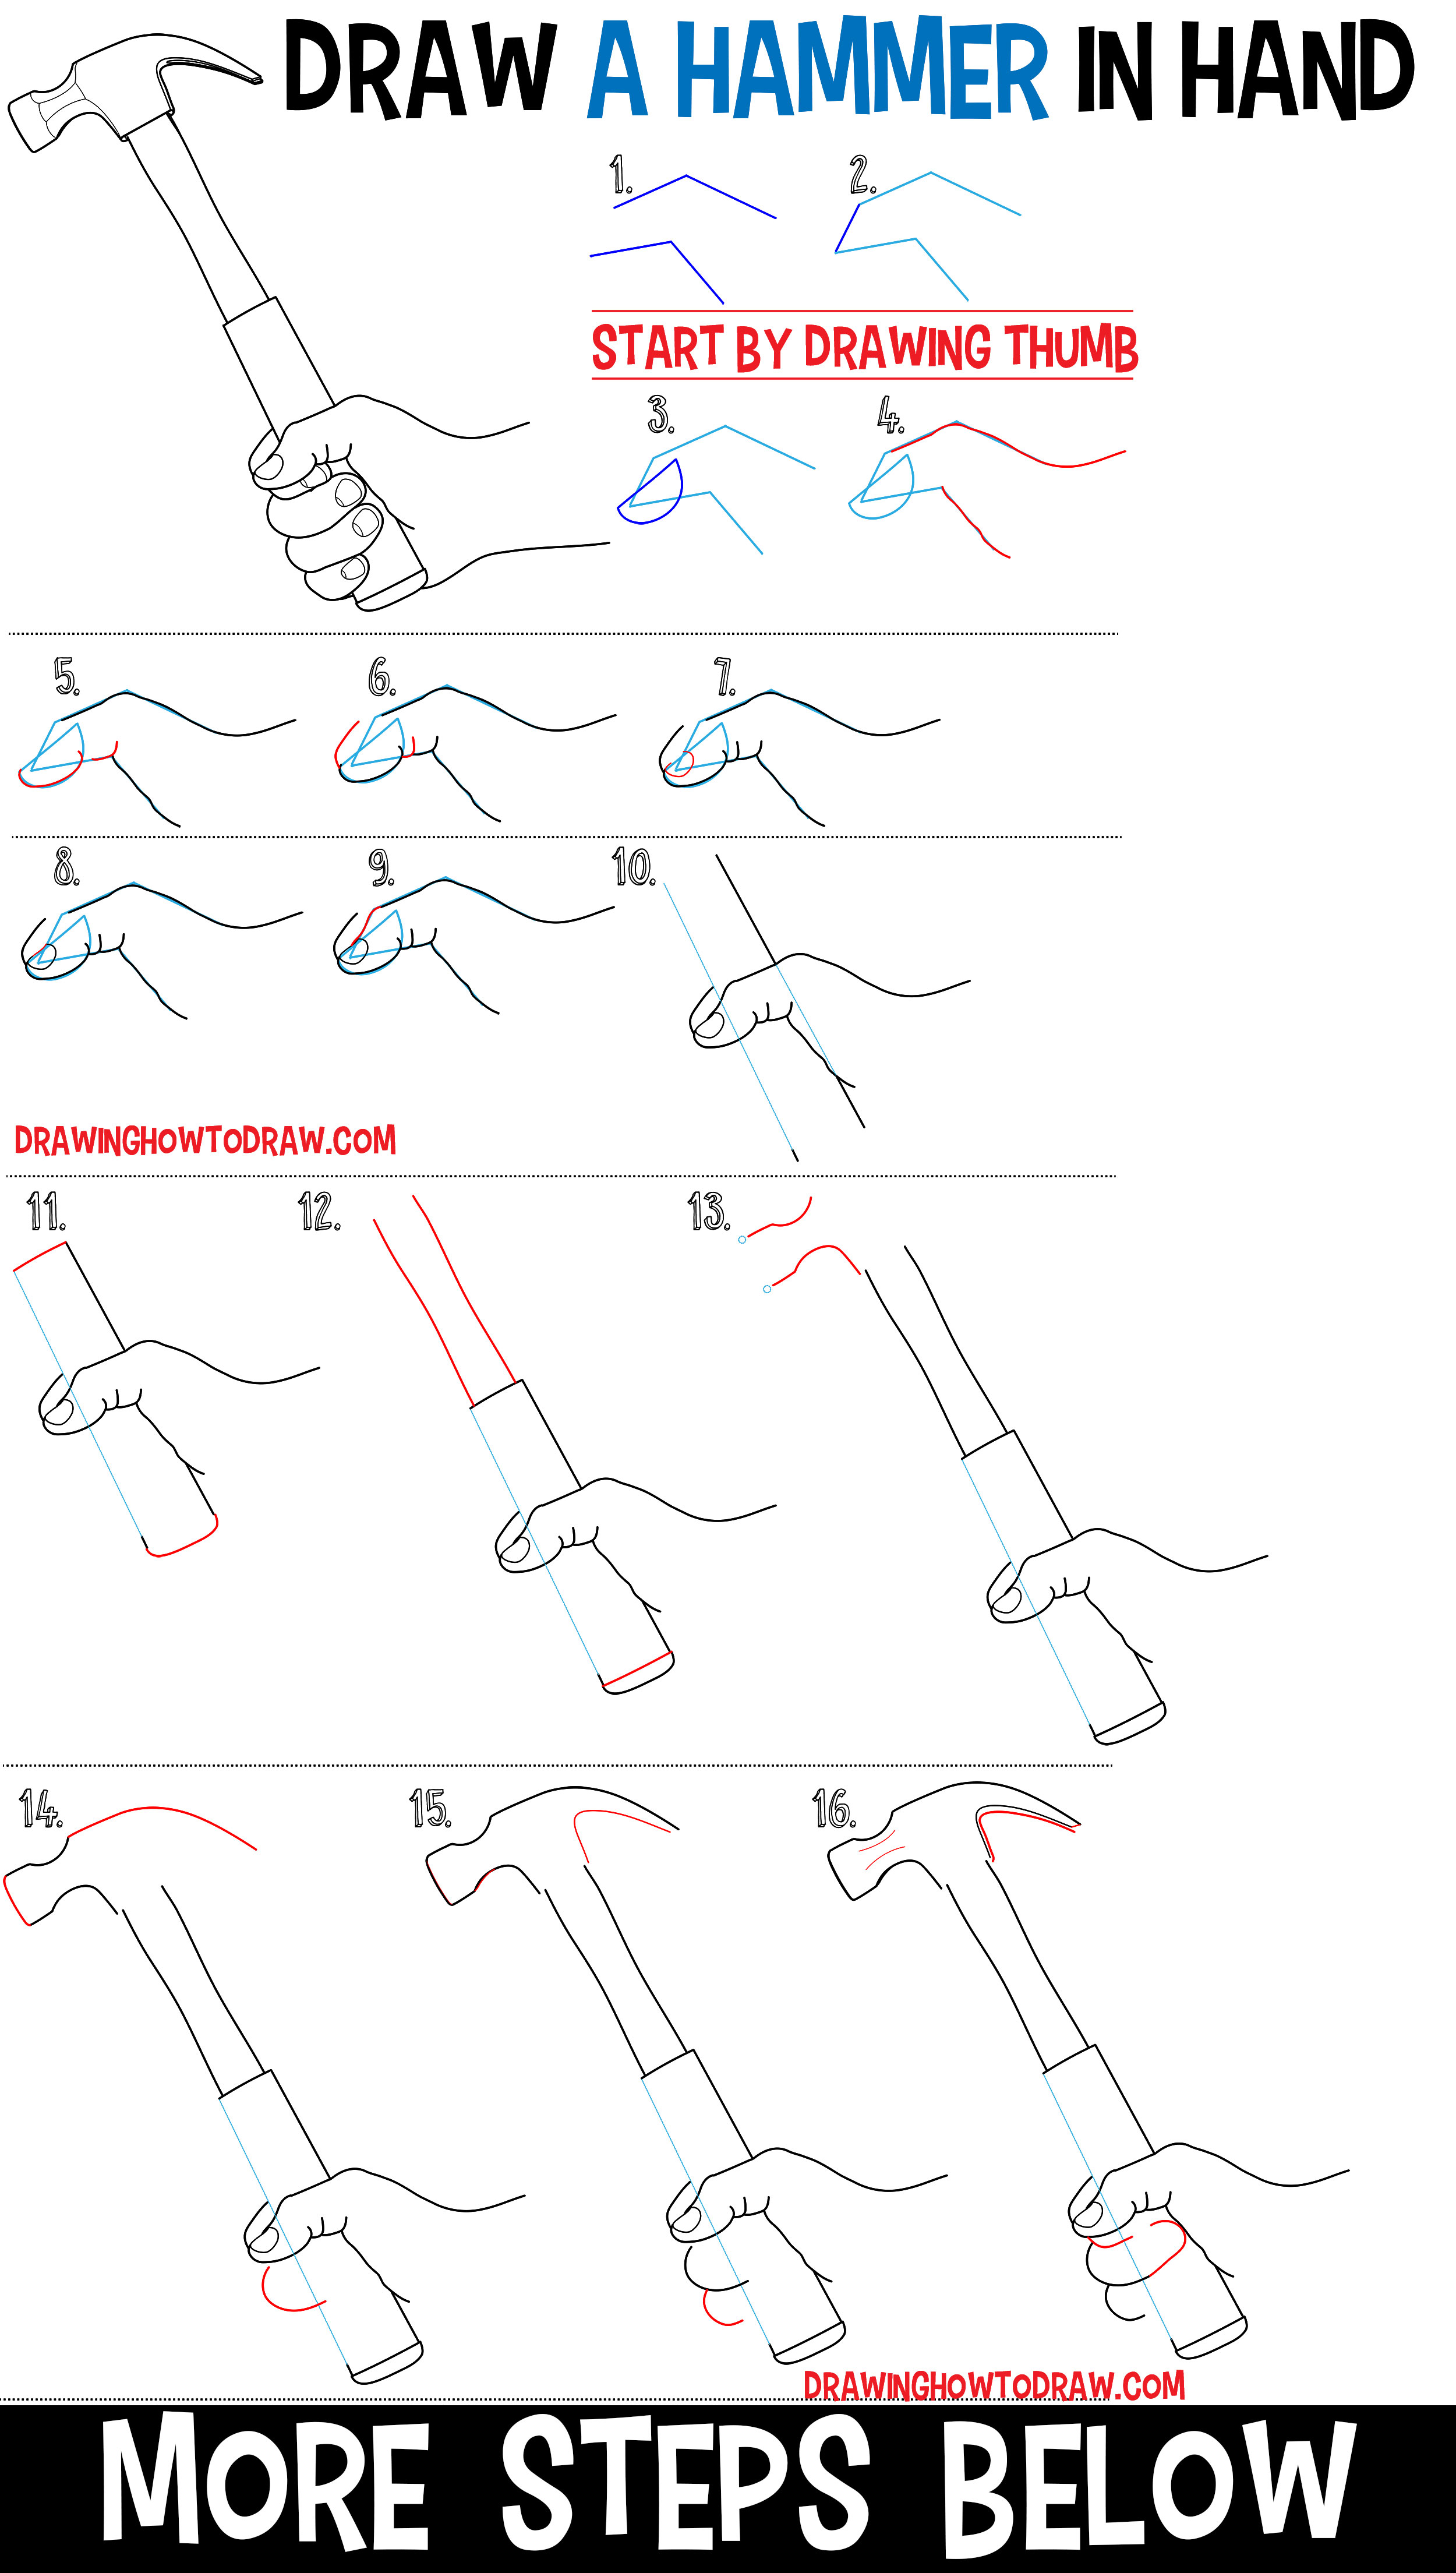 Learn How to Draw a Hand Holding a Hammer Easy Step by Step Drawing Tutorial for Beginners